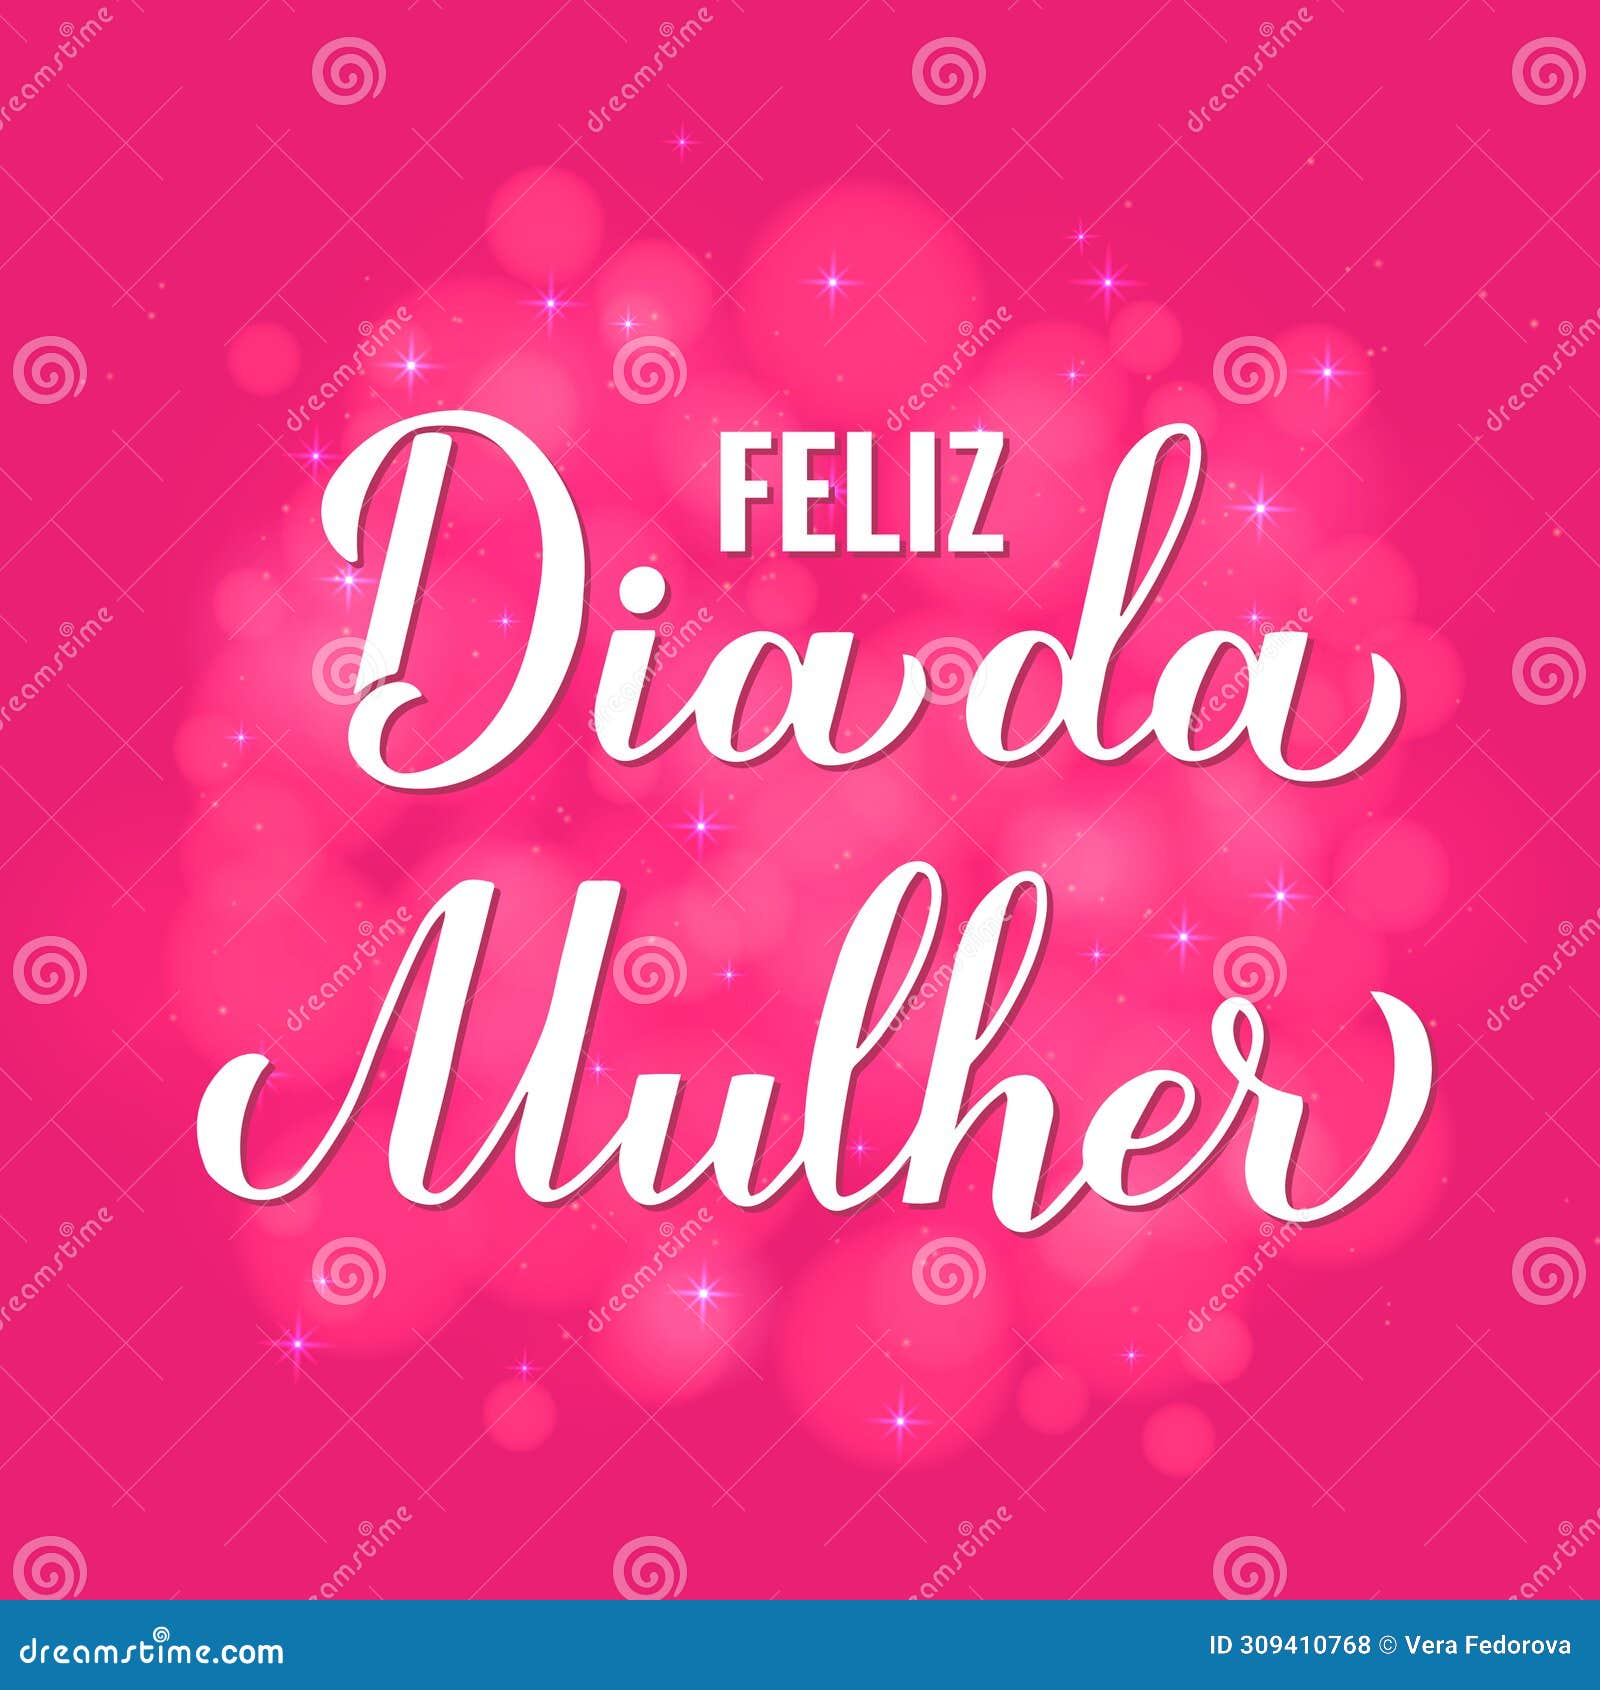 feliz dia da mulher - happy womens day in portuguese. calligraphy lettering on hot pink background with bokeh